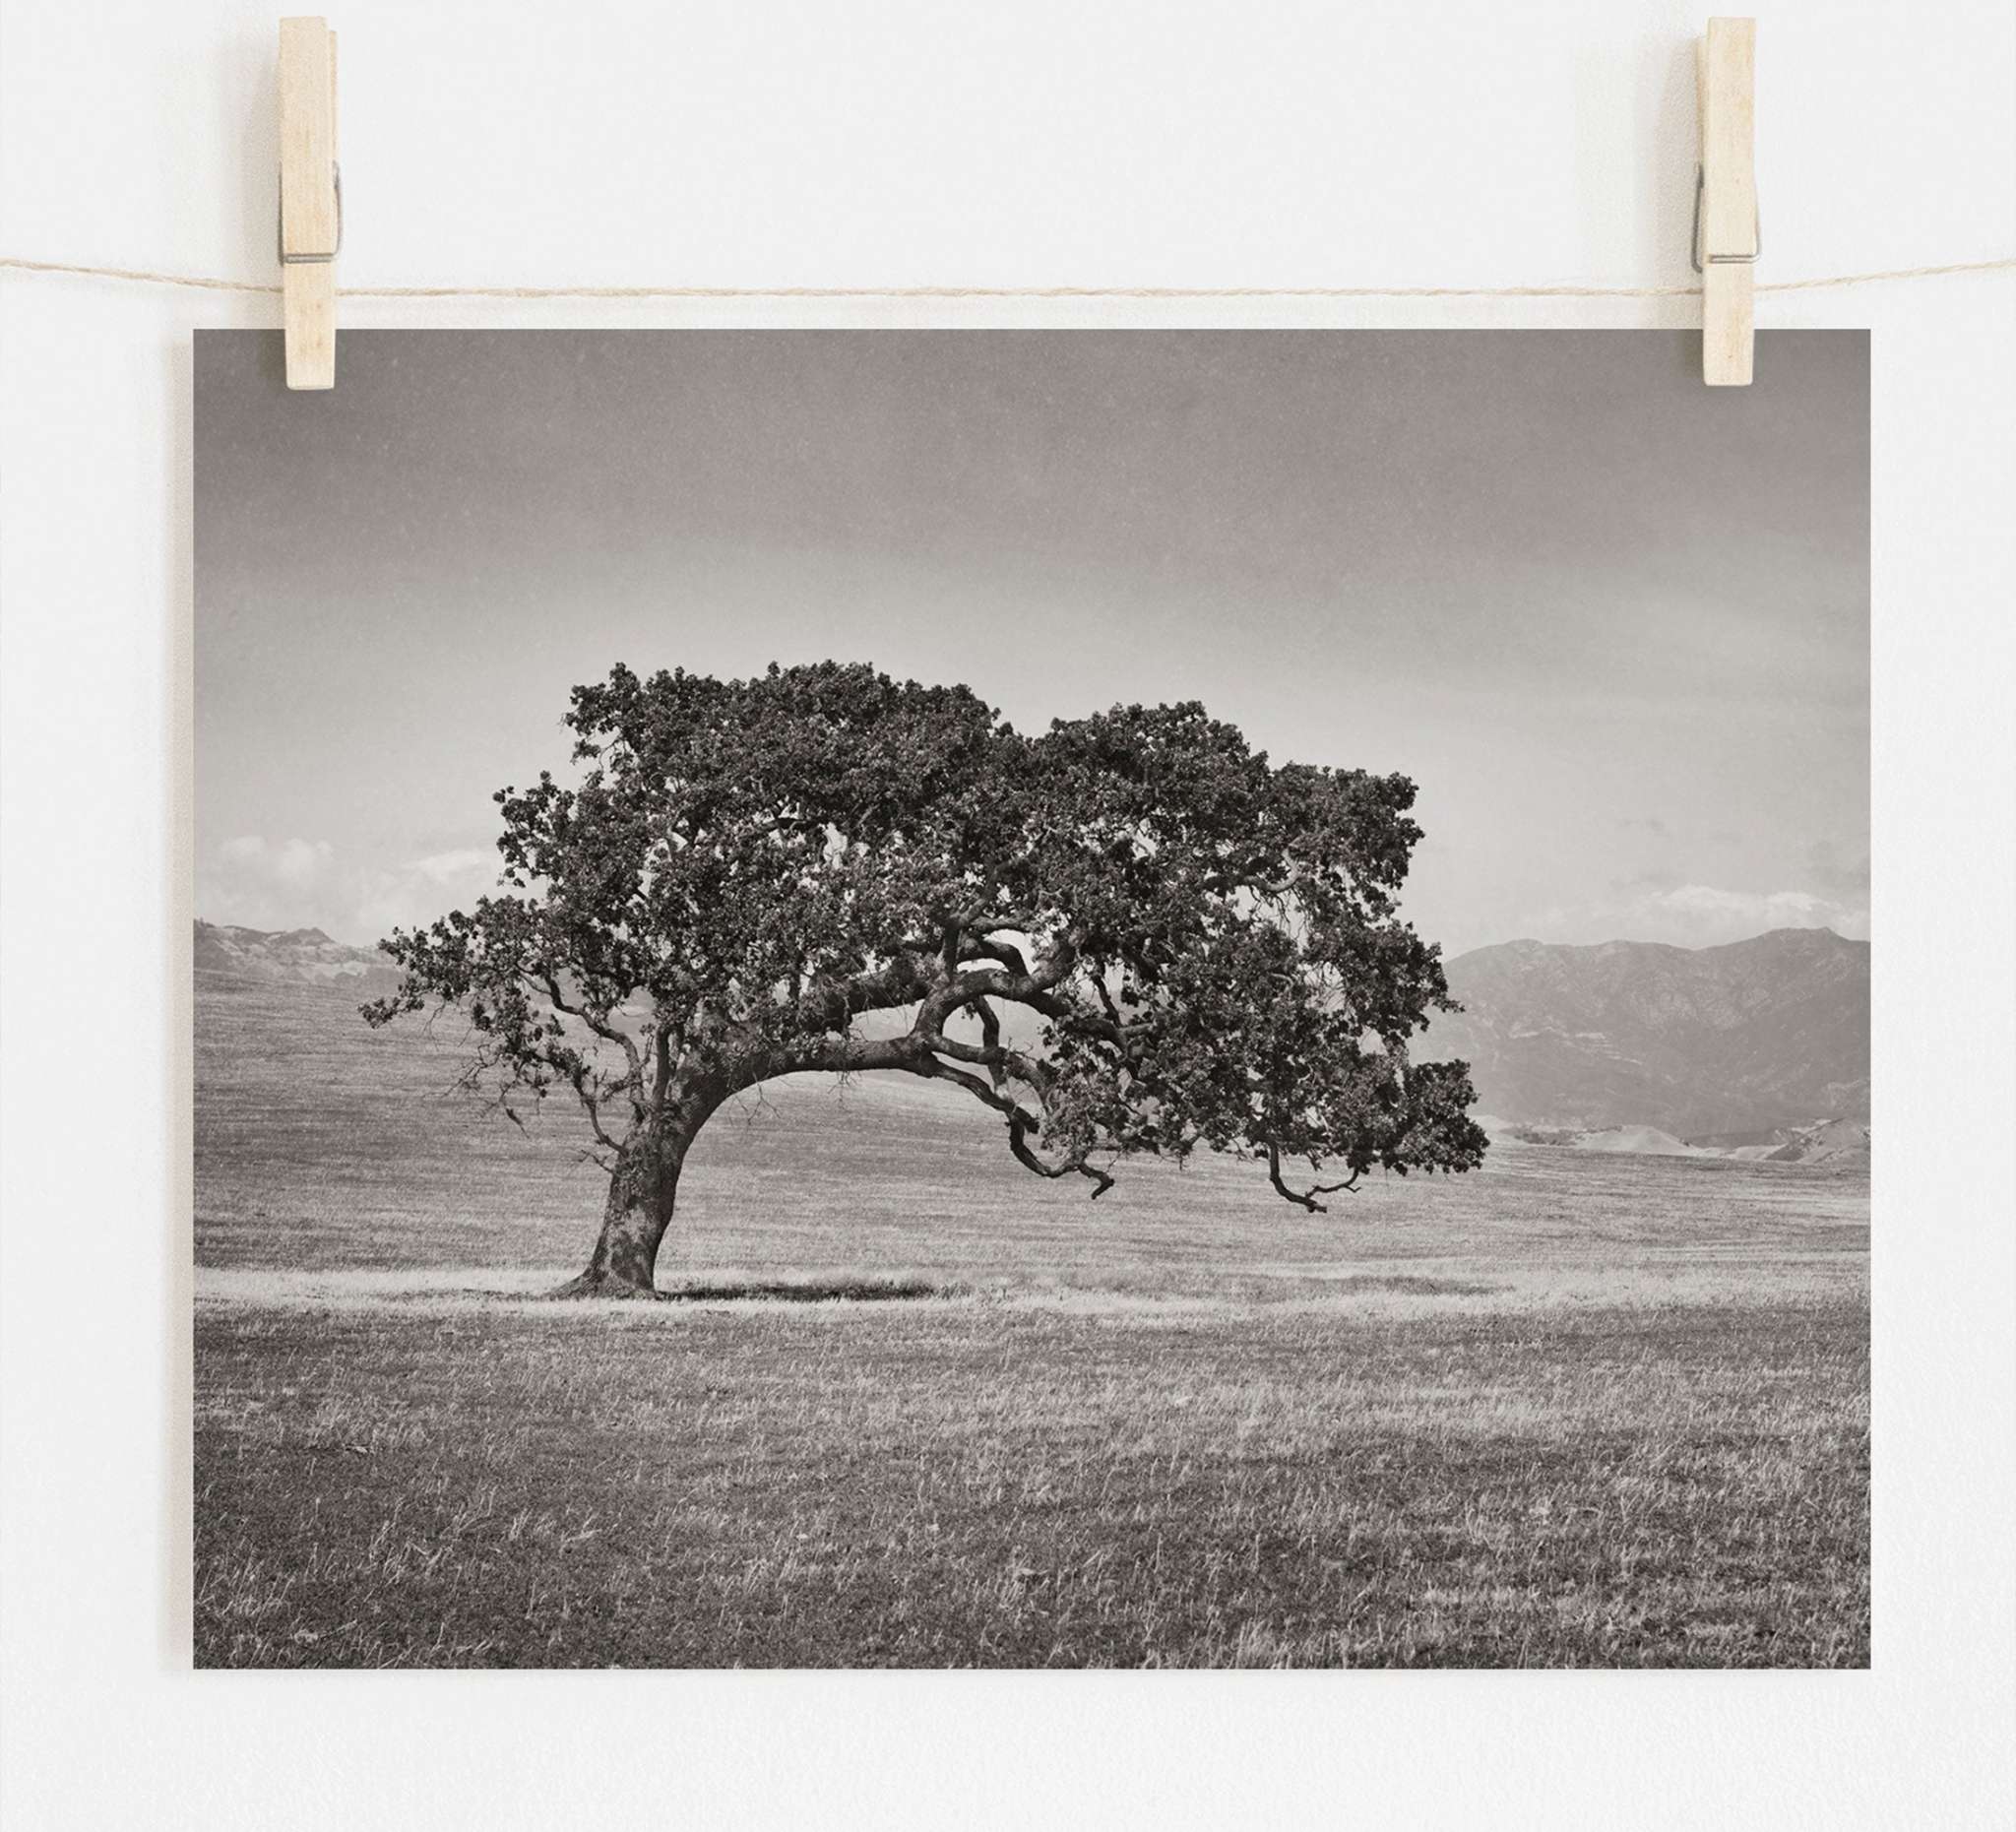 A black and white photograph of a solitary tree with a broad canopy, reminiscent of California Oaks, stands in the middle of an open field. The image, printed on non glossy lustre finish archival photographic paper, is held up by two wooden clothespins on a line against a plain white background. Rolling hills can be seen in the distance. The piece titled "Californian Oak Tree Landscape, 'Windswept (Black and White)'" by Offley Green captures this serene scene beautifully.